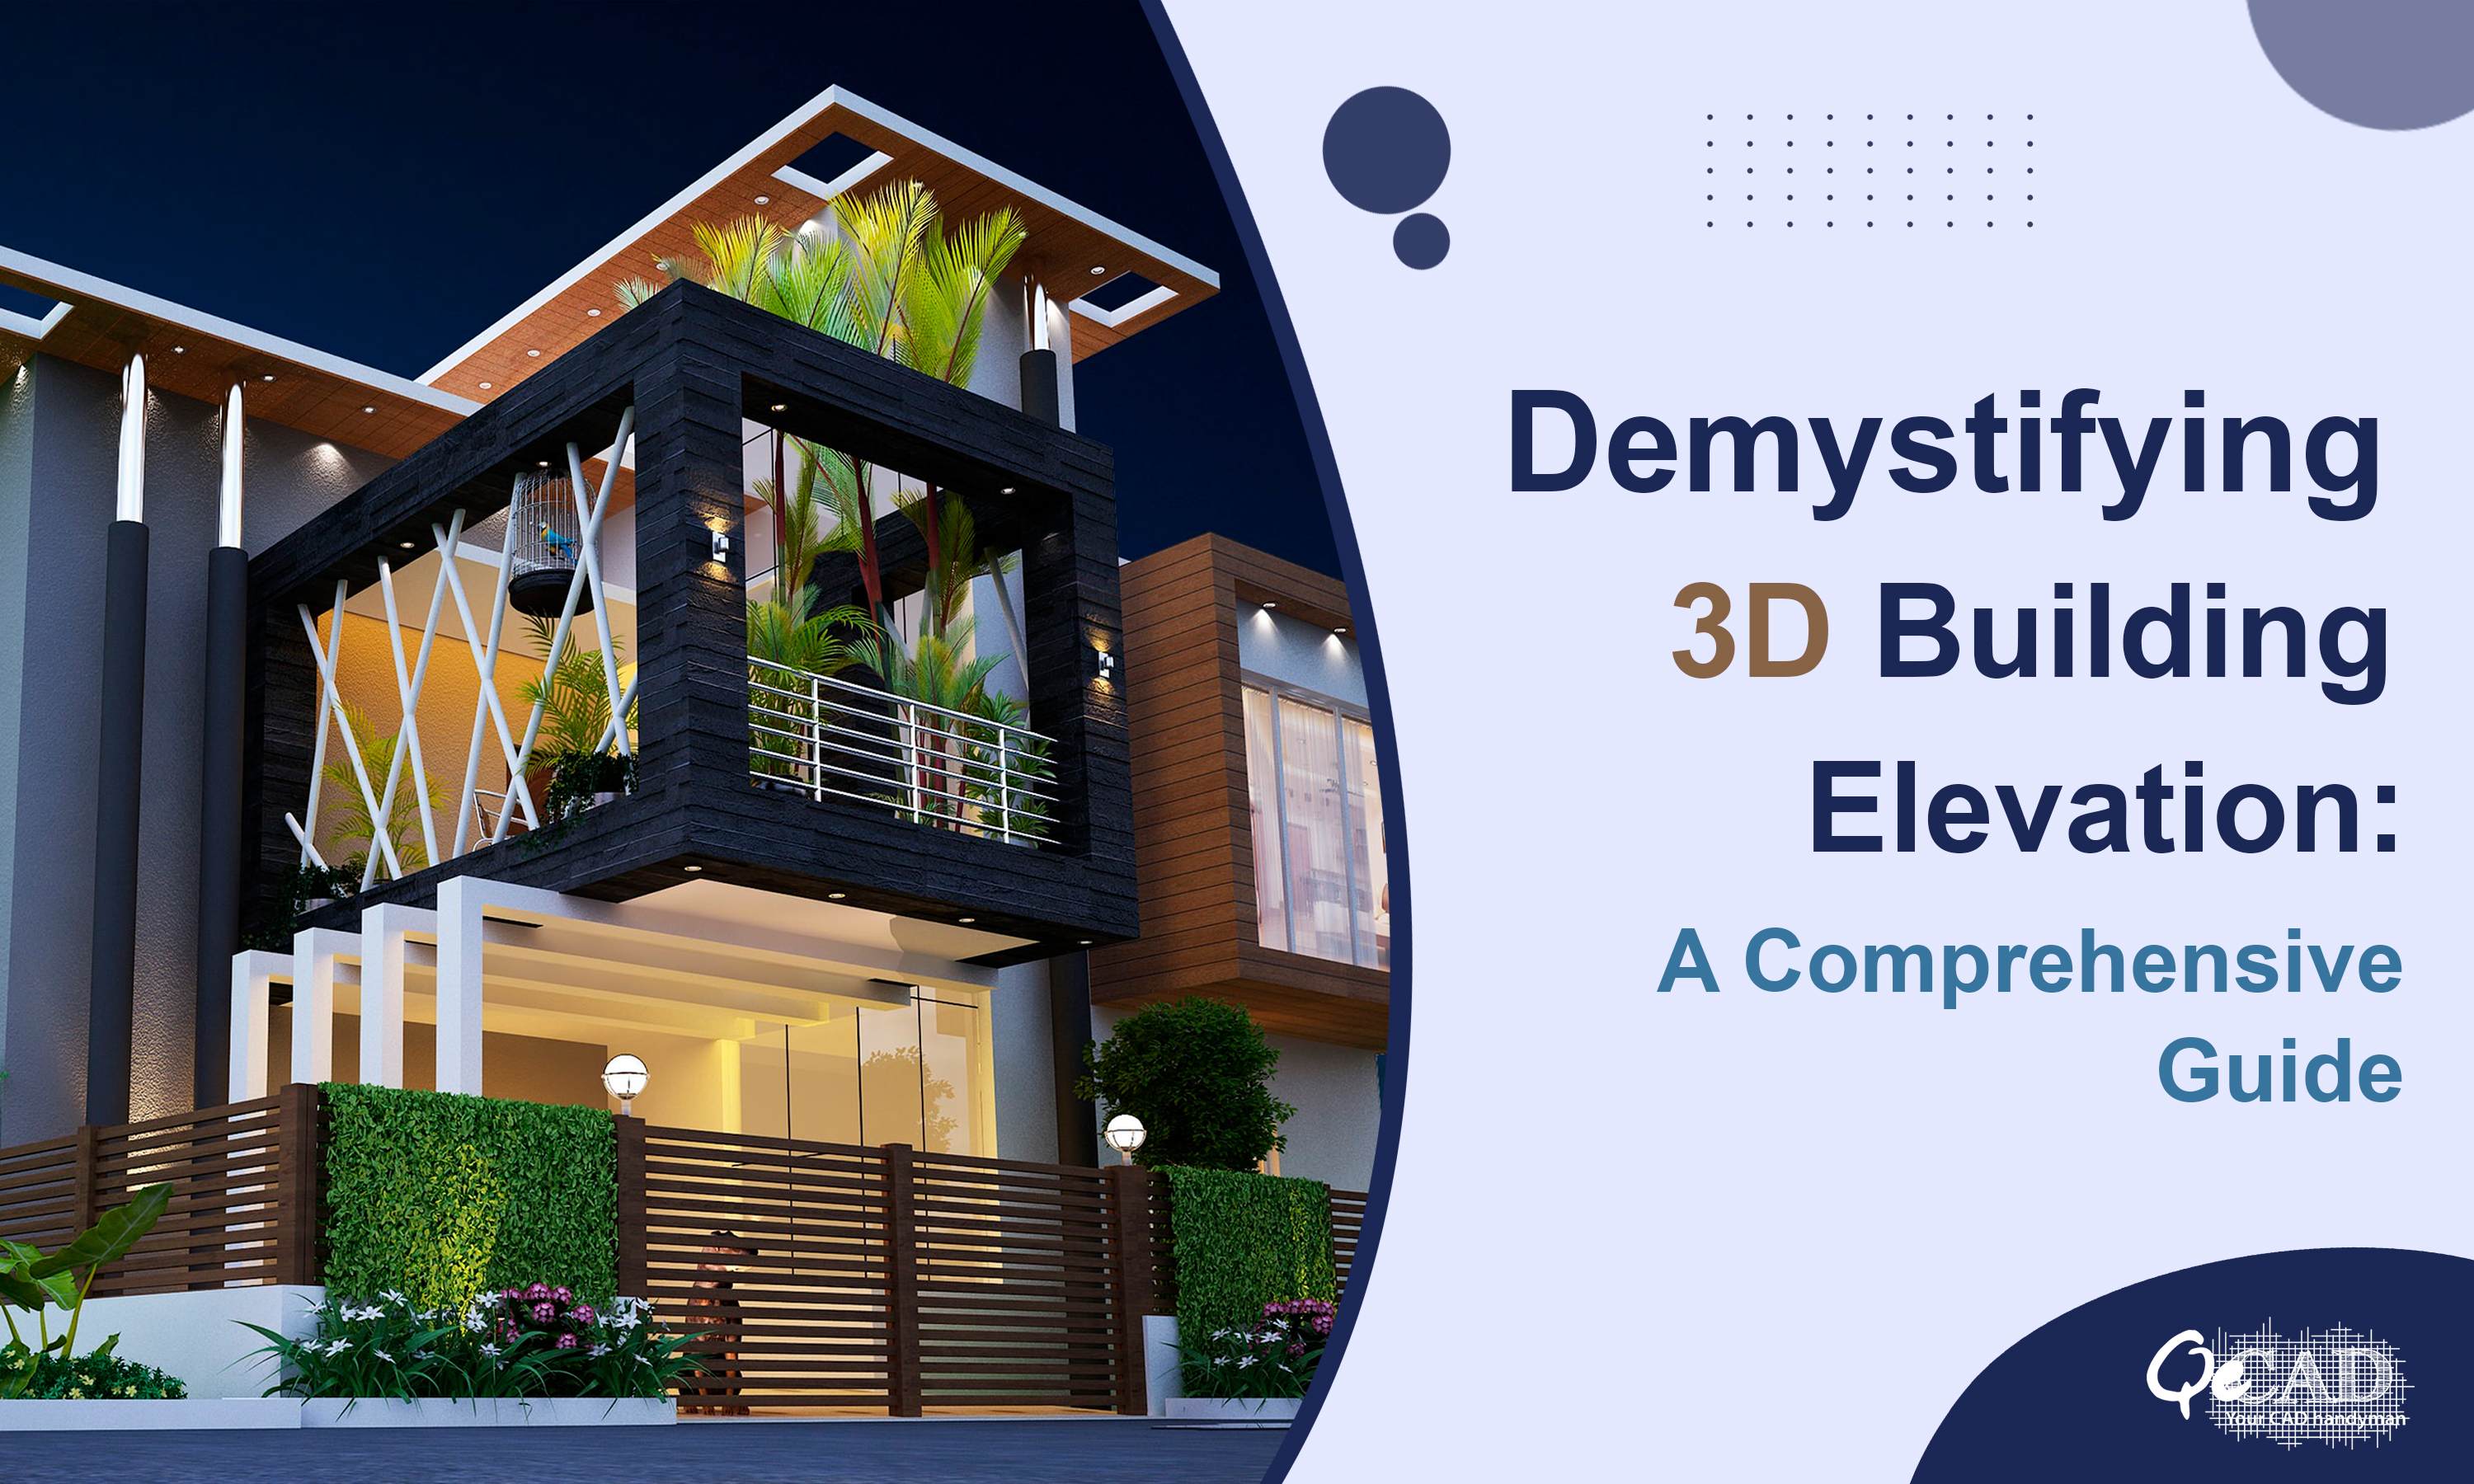 Demystifying 3D Building Elevation: A Comprehensive Guide